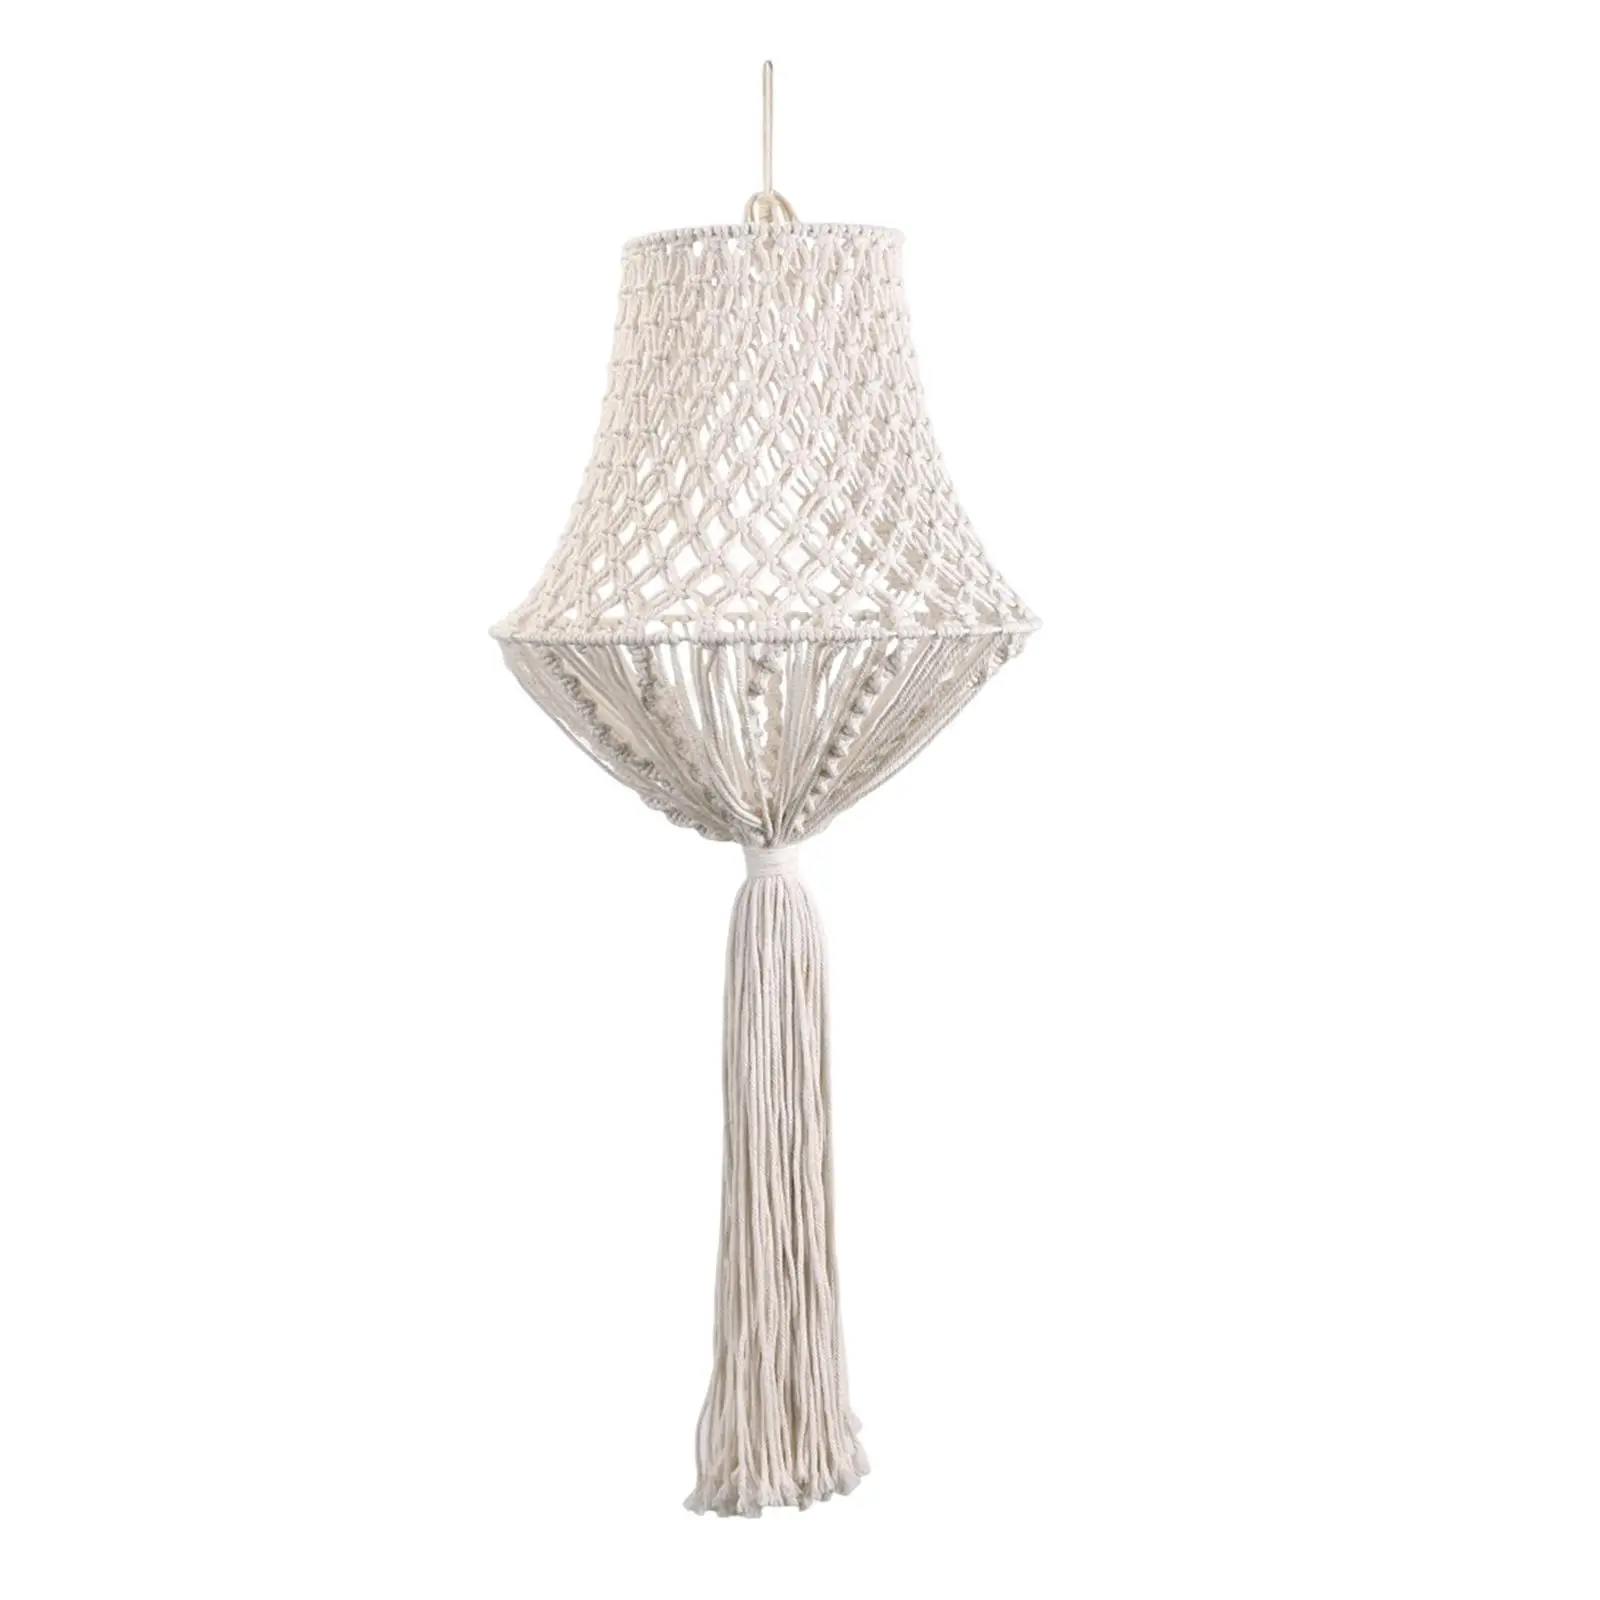 Rural Style Macrame Lamp Shade Handmade Weaving Ceiling Light Shade Fitting Chandelier Lampshade for Living Room Home Decoration